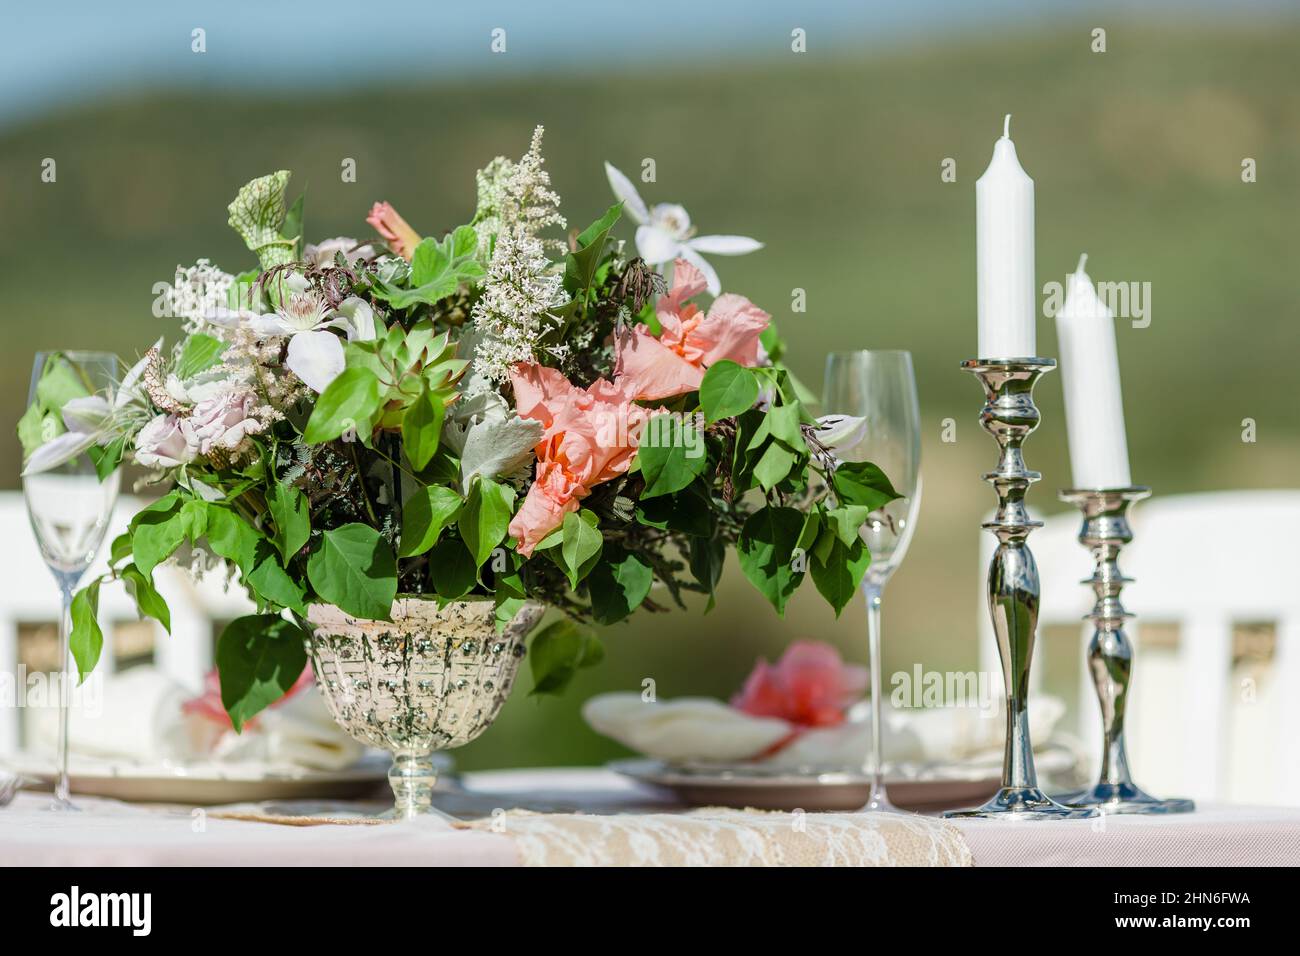 Elegant Outdoor Table Setting with Candles and Fresh Flowers Stock Photo